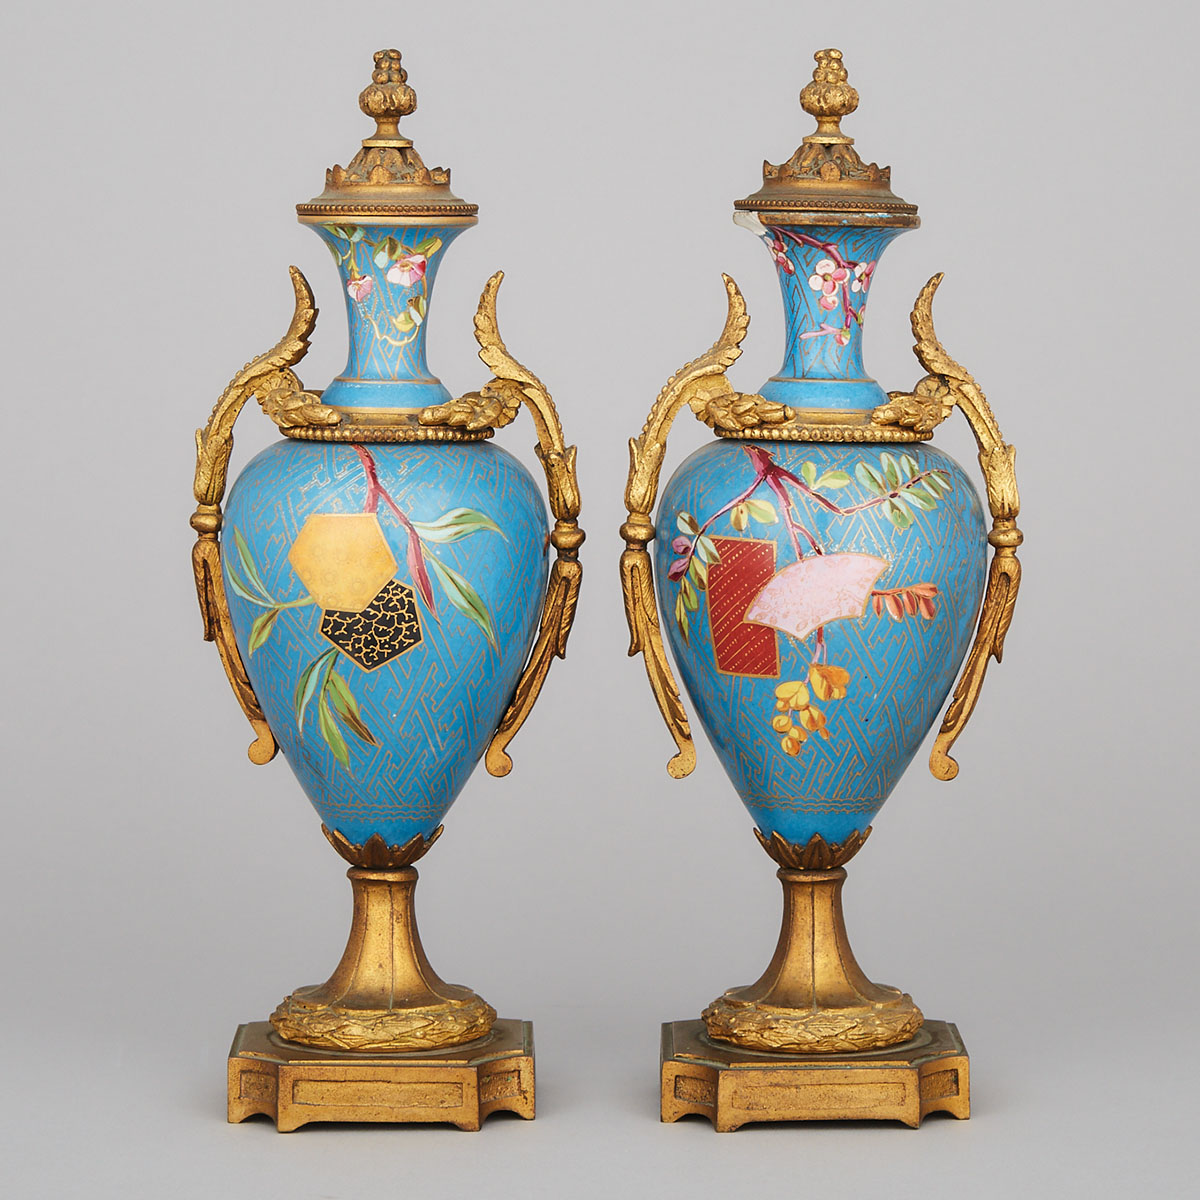 Pair of French Porcelain Ormolu Mounted Covered Vases, late 19th century